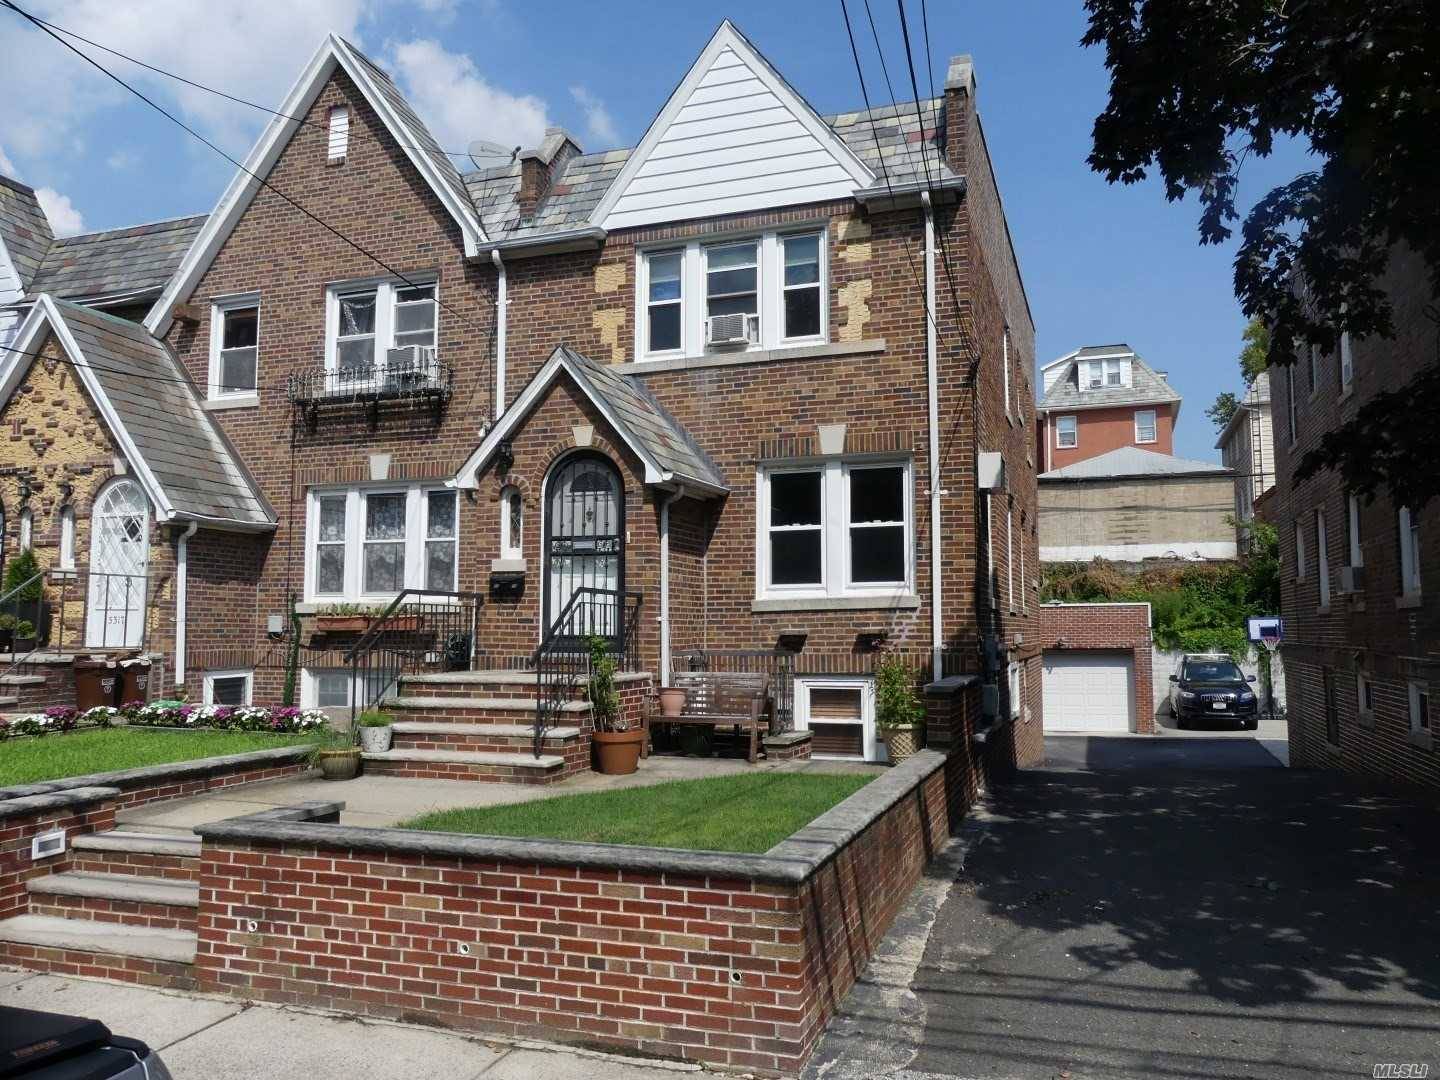 Maspeth Pack Your Bags And Move Right In To This Totally Renovated Legal Two Family Semi Detached Brick Home !